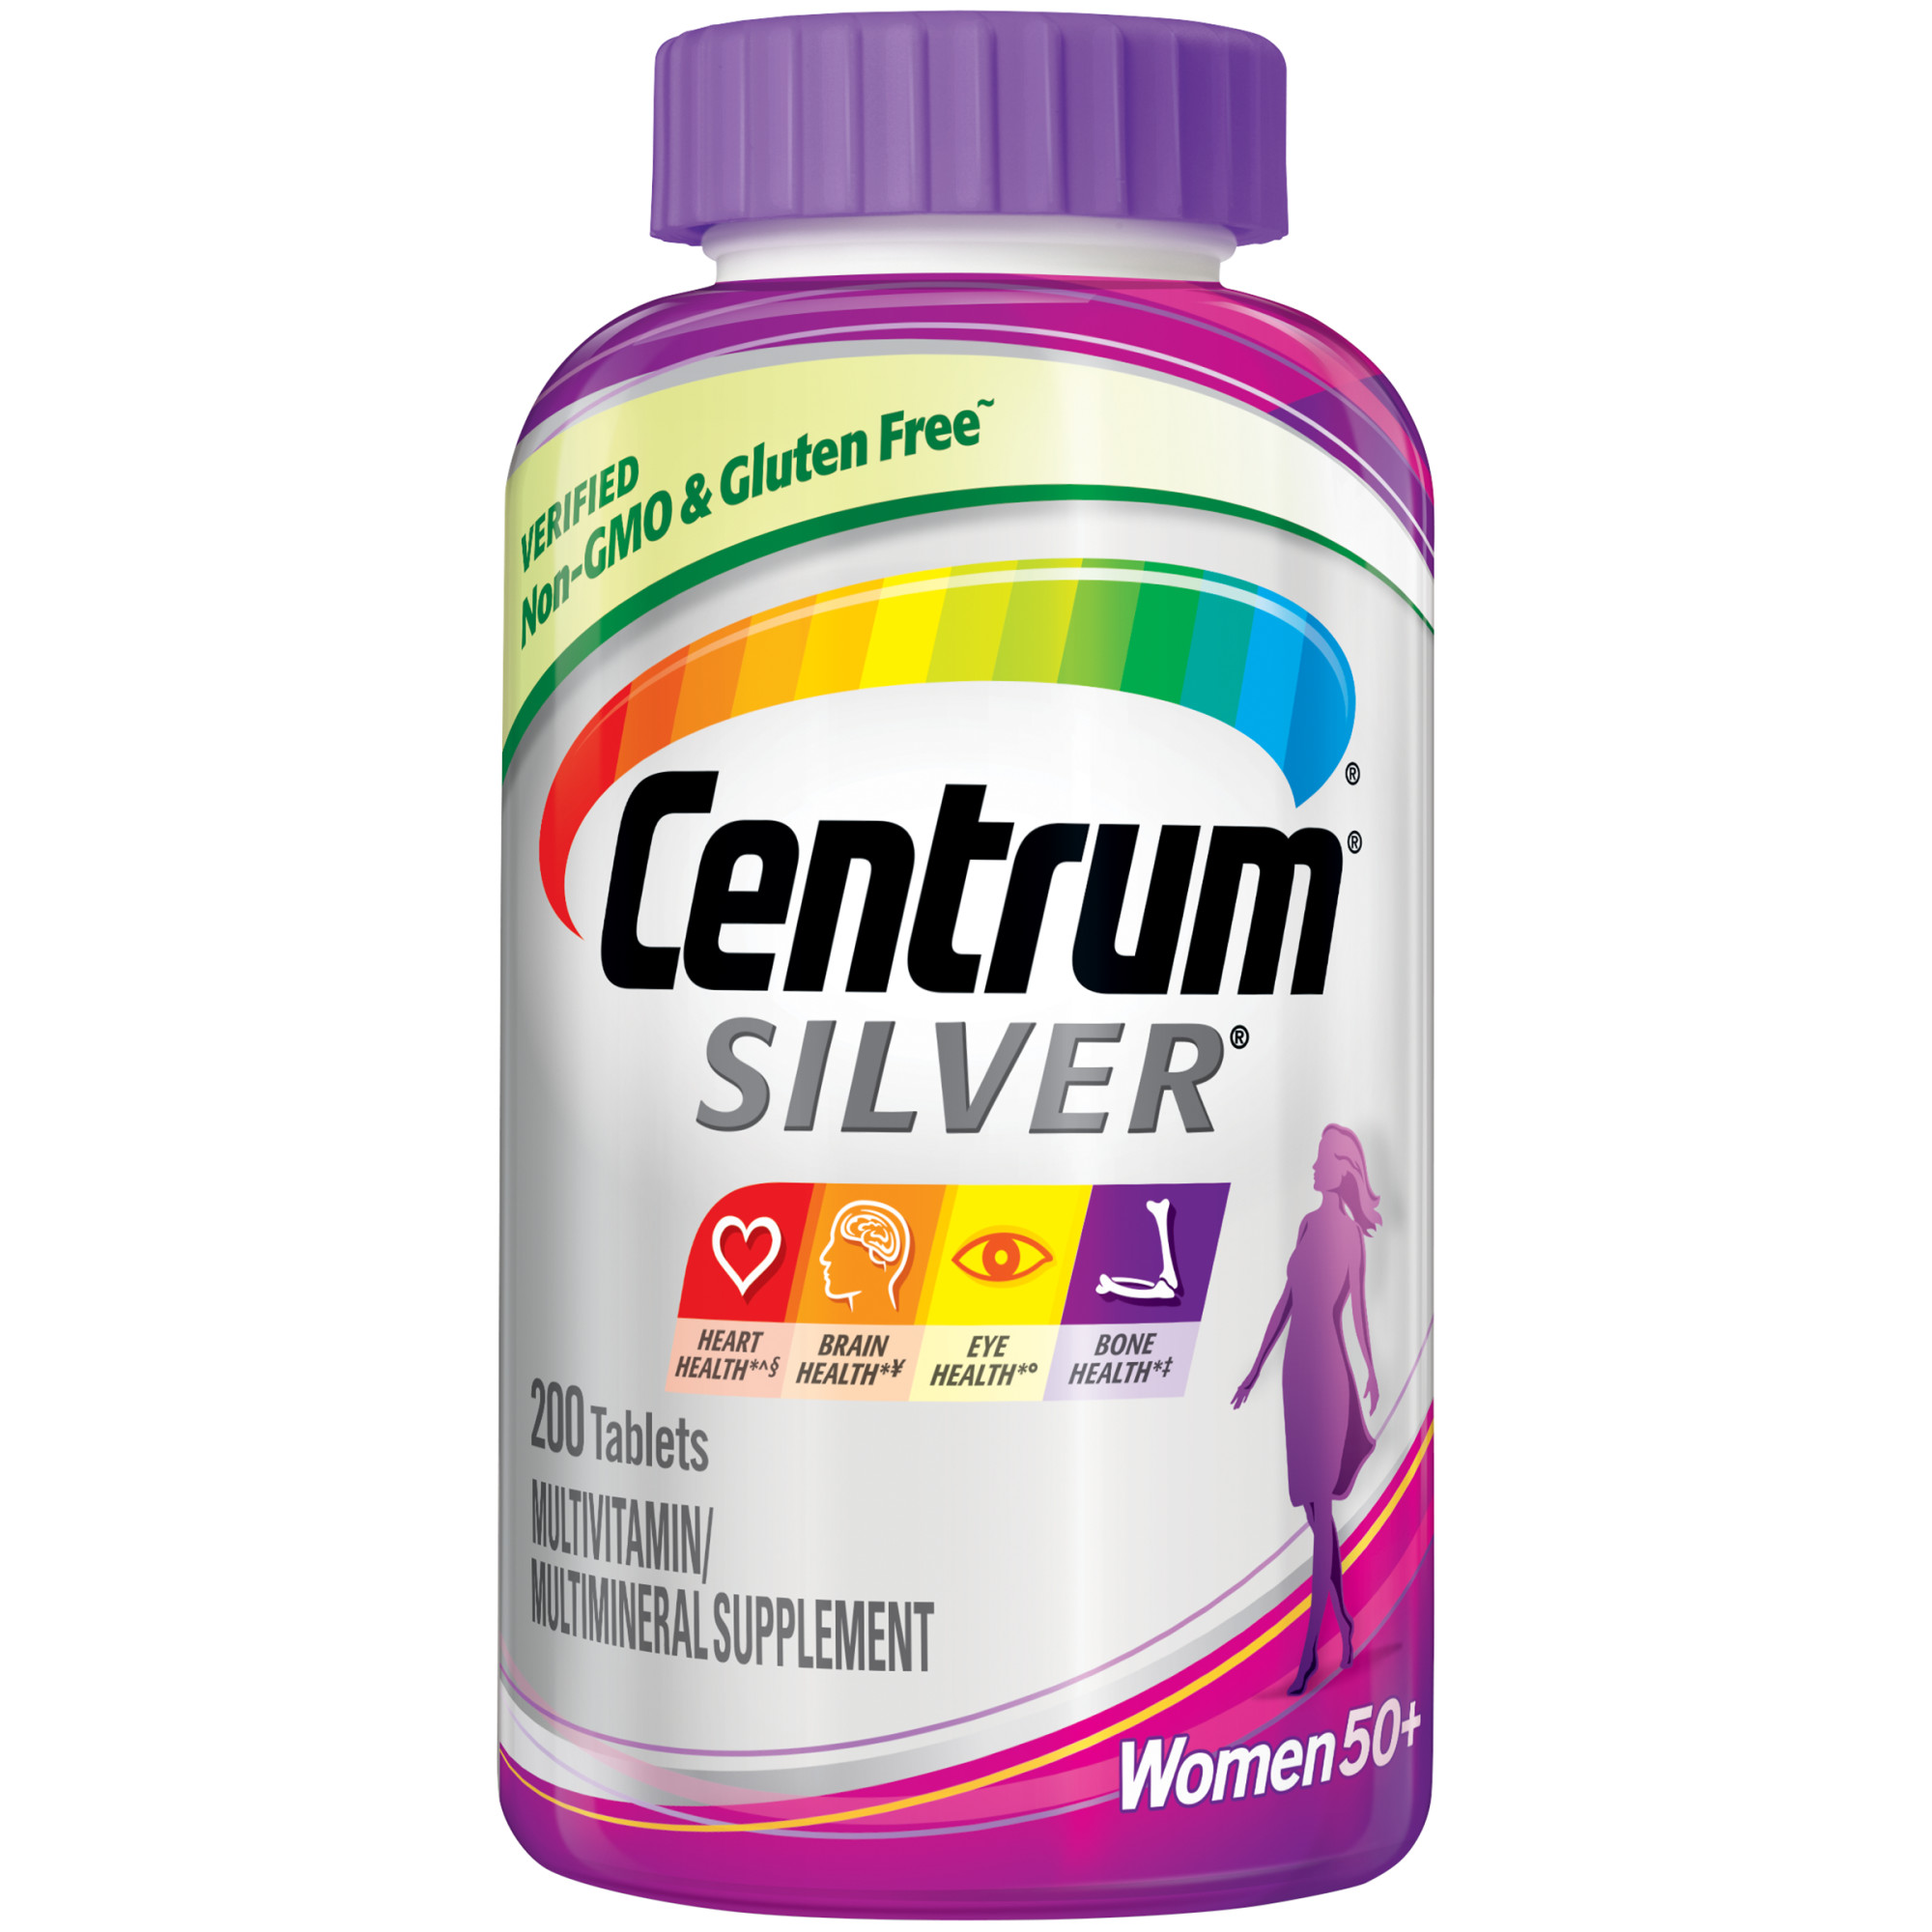 Centrum Silver Multivitamins for Women Over 50, Multimineral Supplement, 200 Ct - image 1 of 14